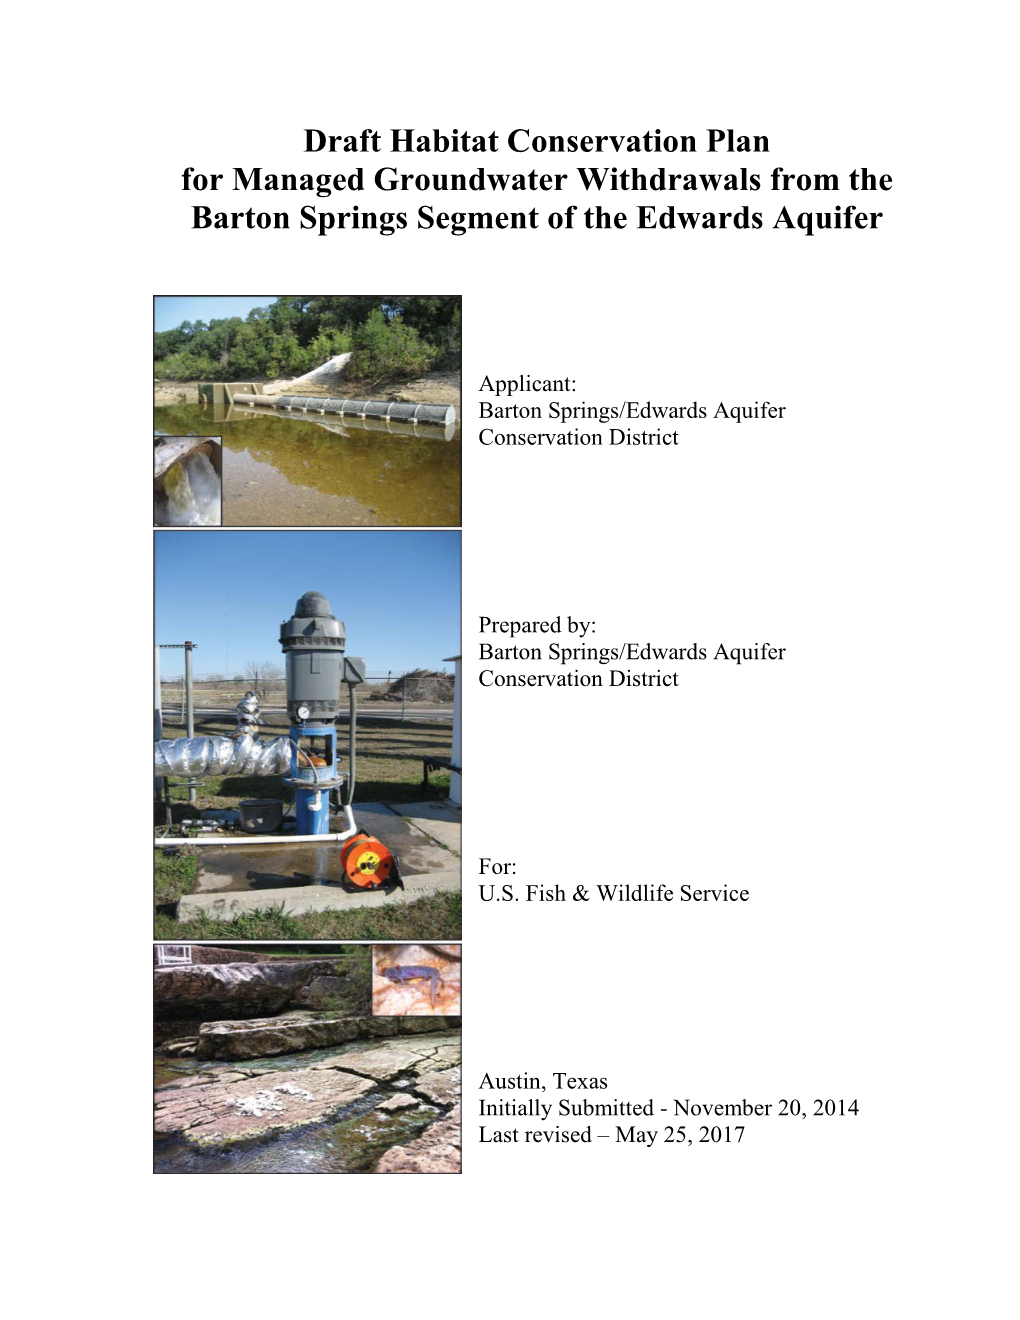 Draft Habitat Conservation Plan for Managed Groundwater Withdrawals from the Barton Springs Segment of the Edwards Aquifer